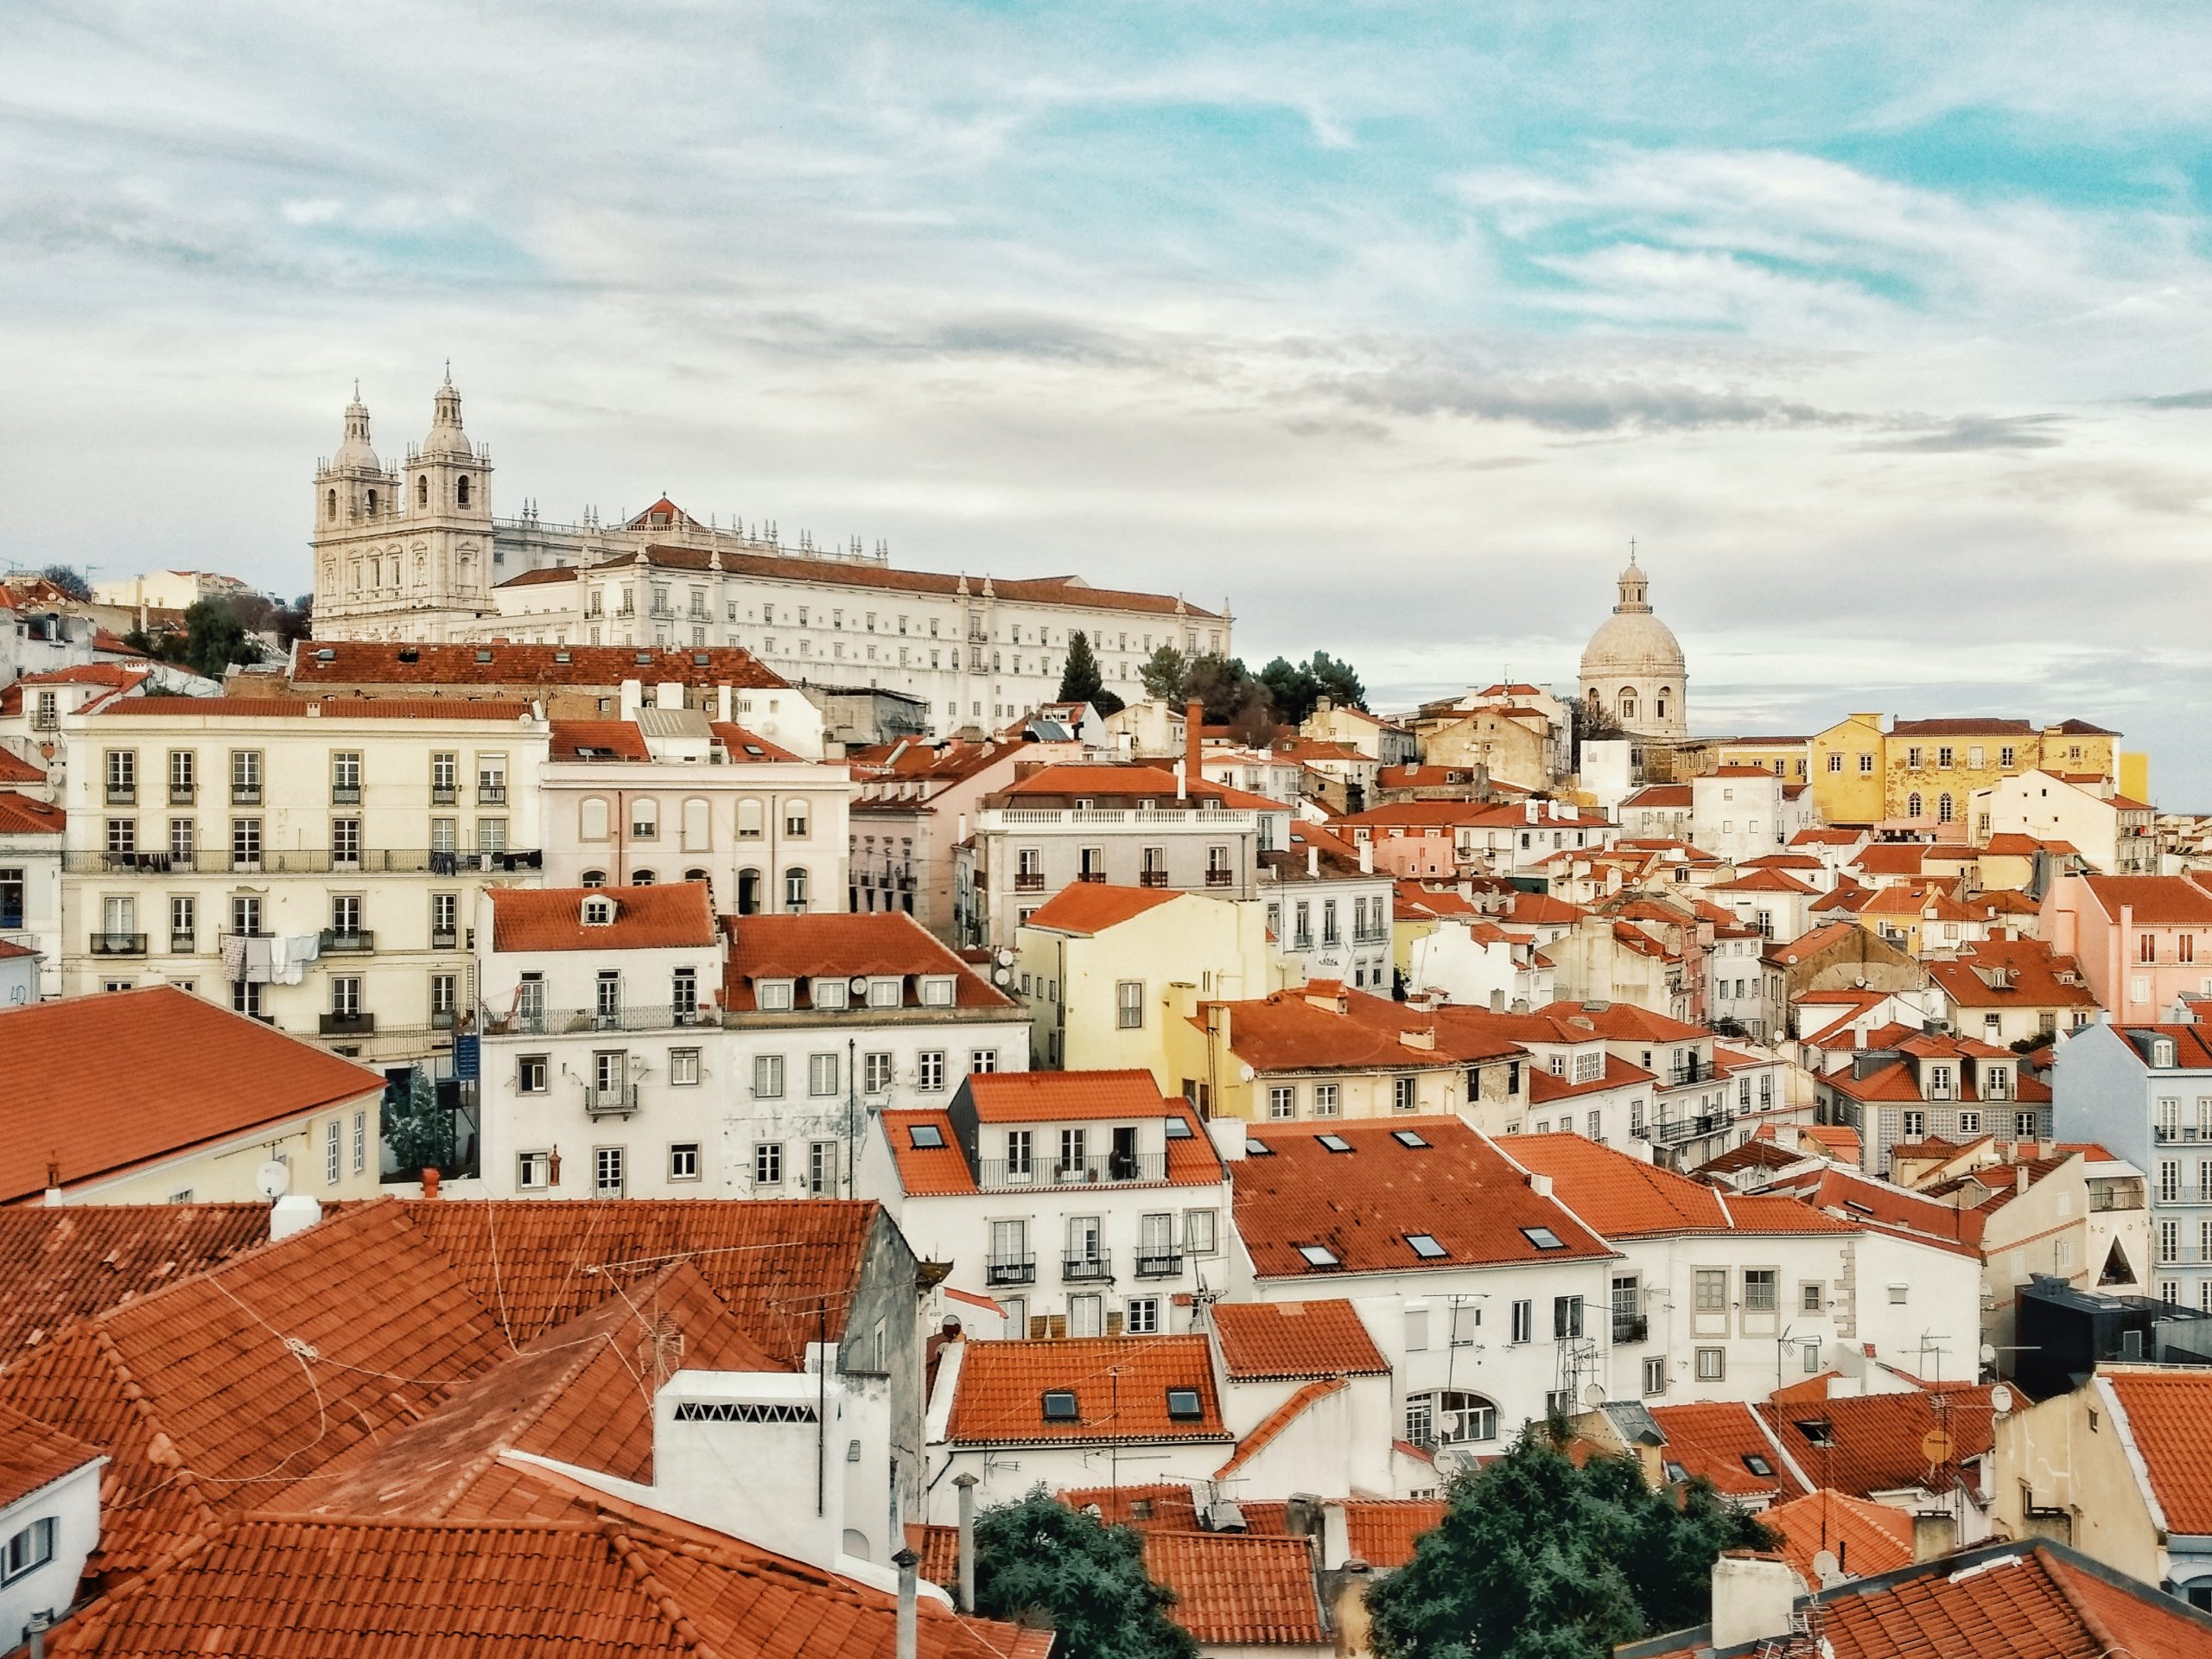 Why is Portugal so attractive to foreign investment and immigrants?